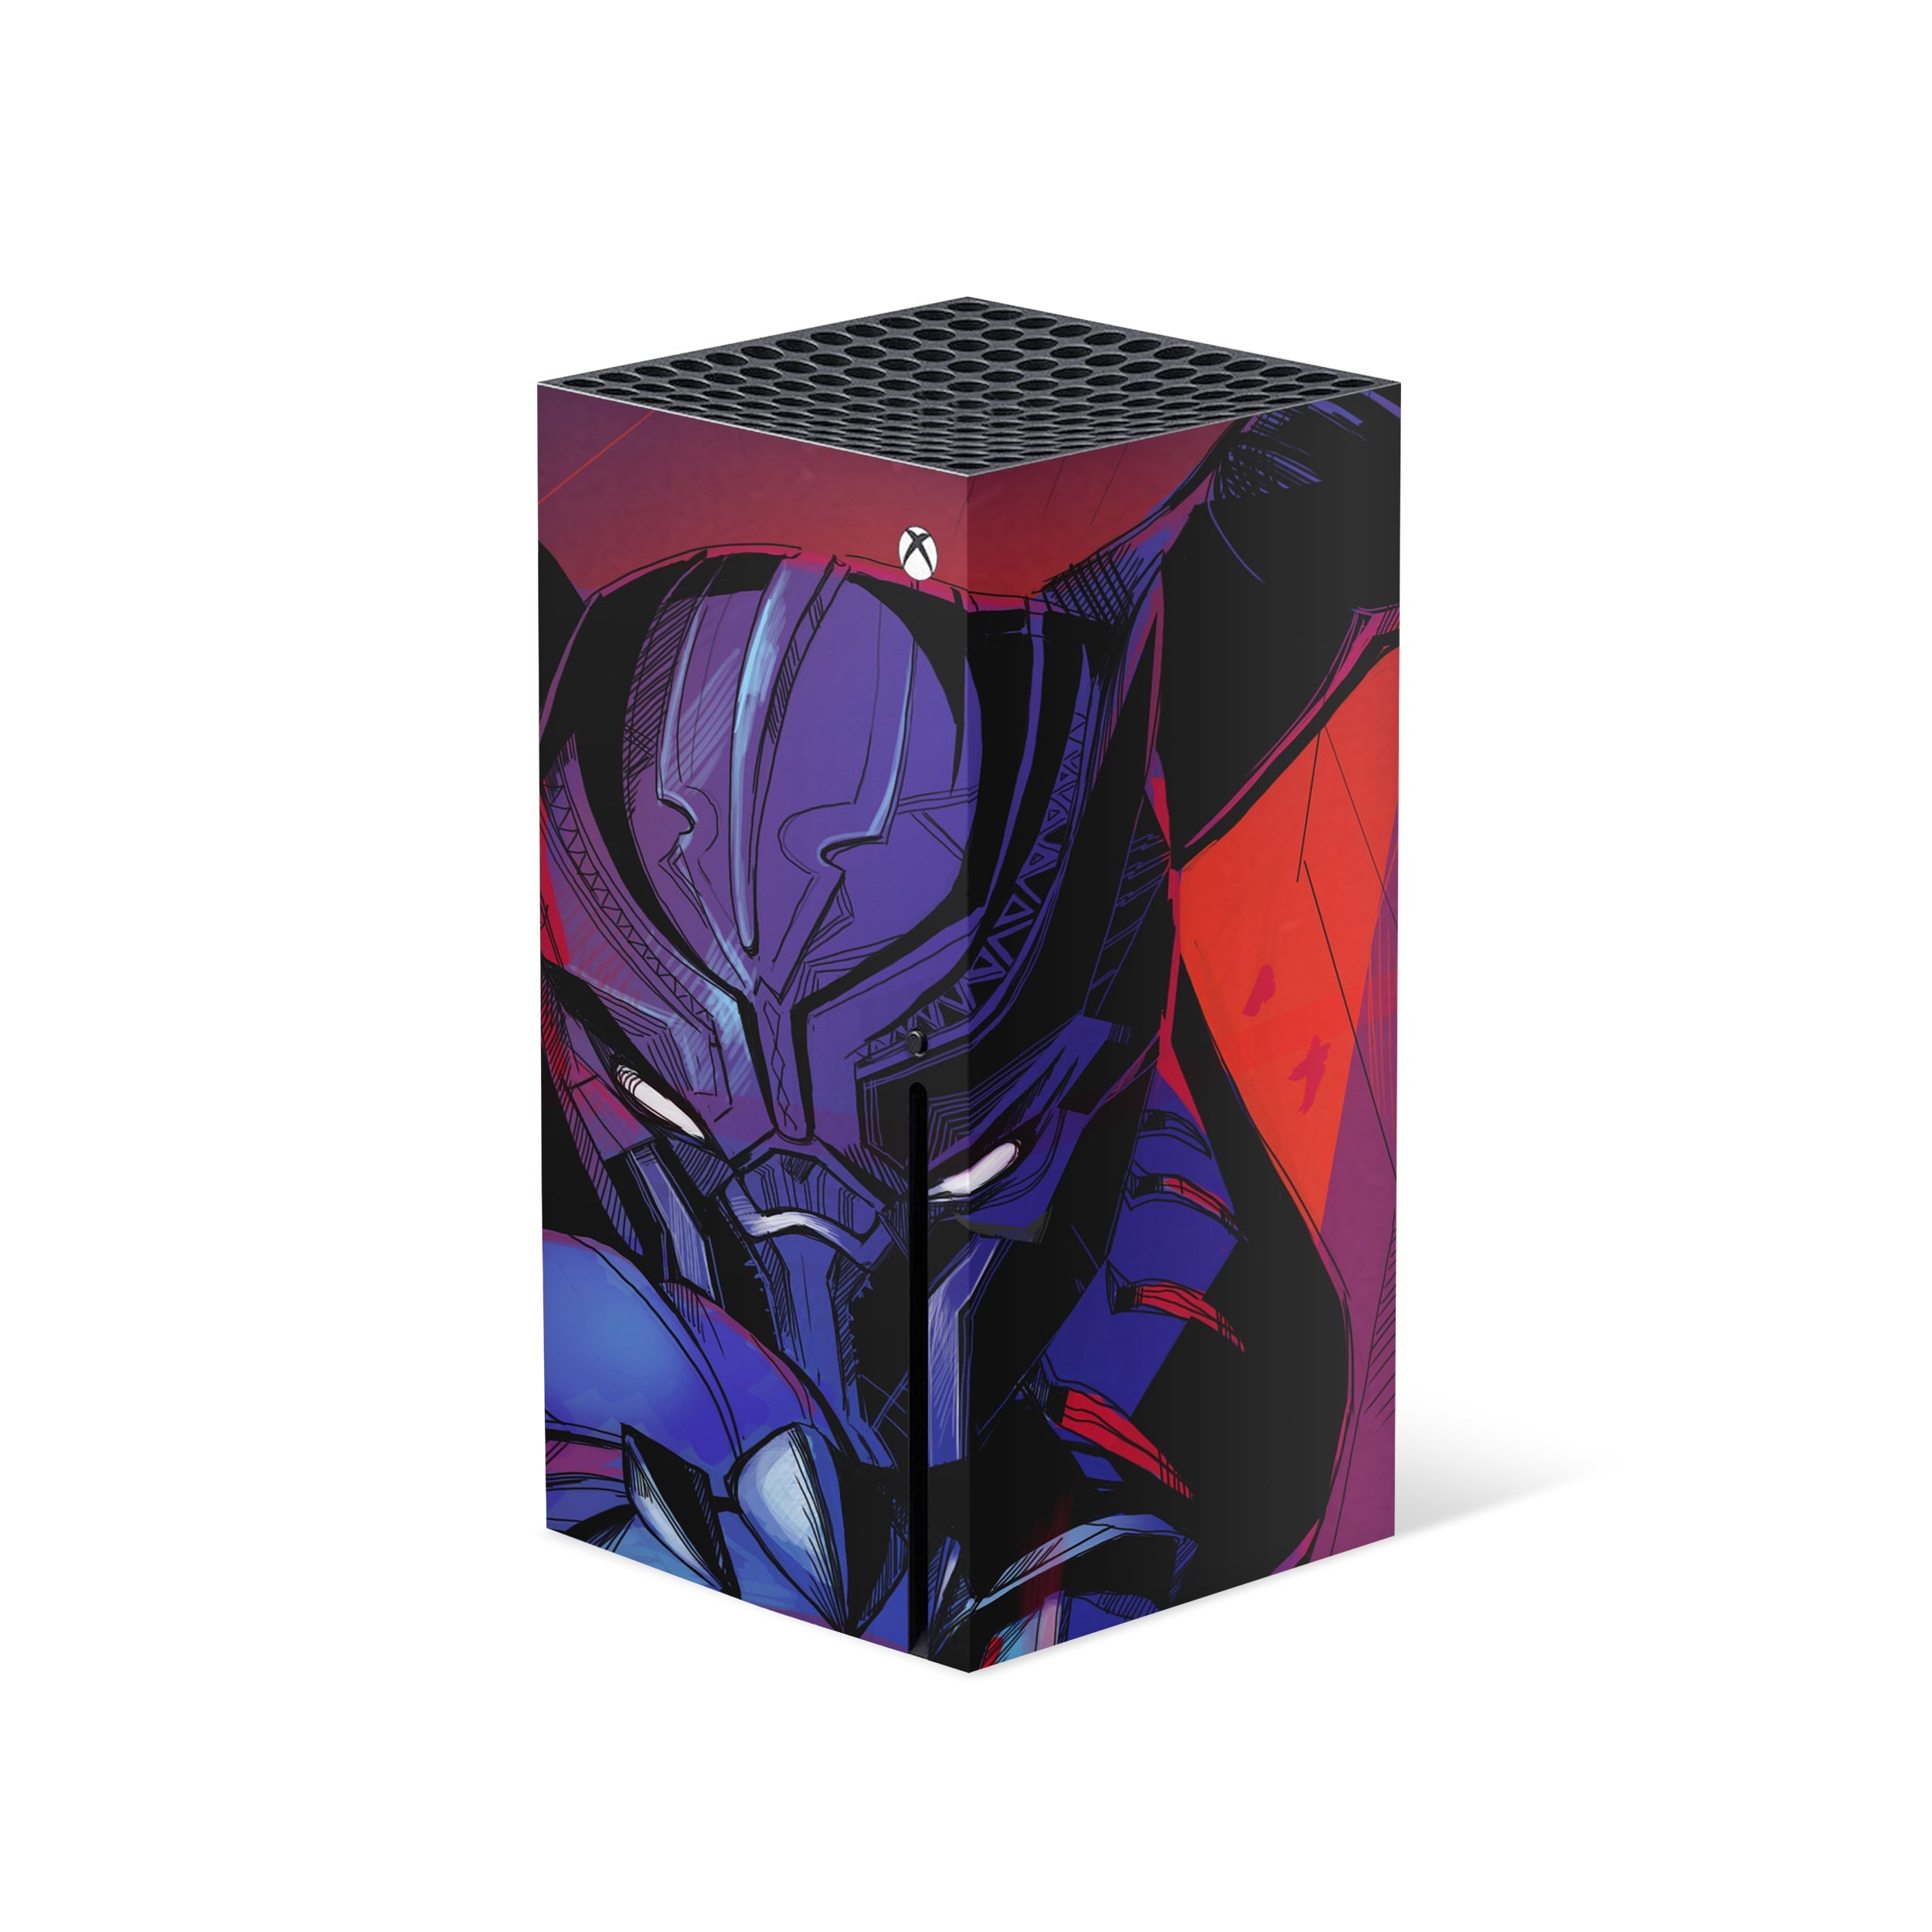 A video game skin featuring a Marvel Comics Black Panther design for the Xbox Series X.